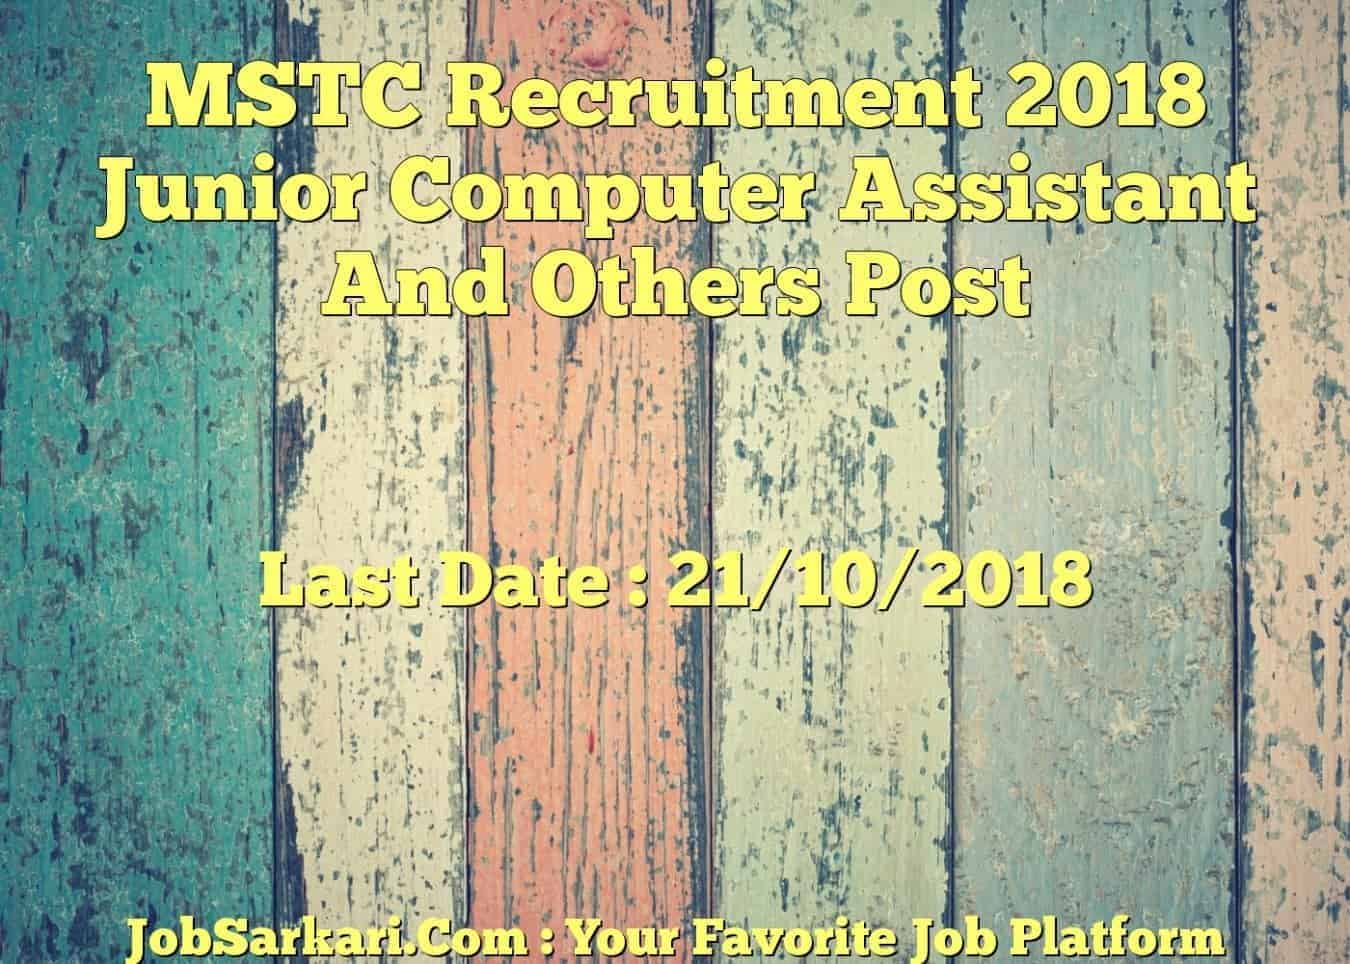 MSTC Recruitment 2018 Junior Computer Assistant And Others Post